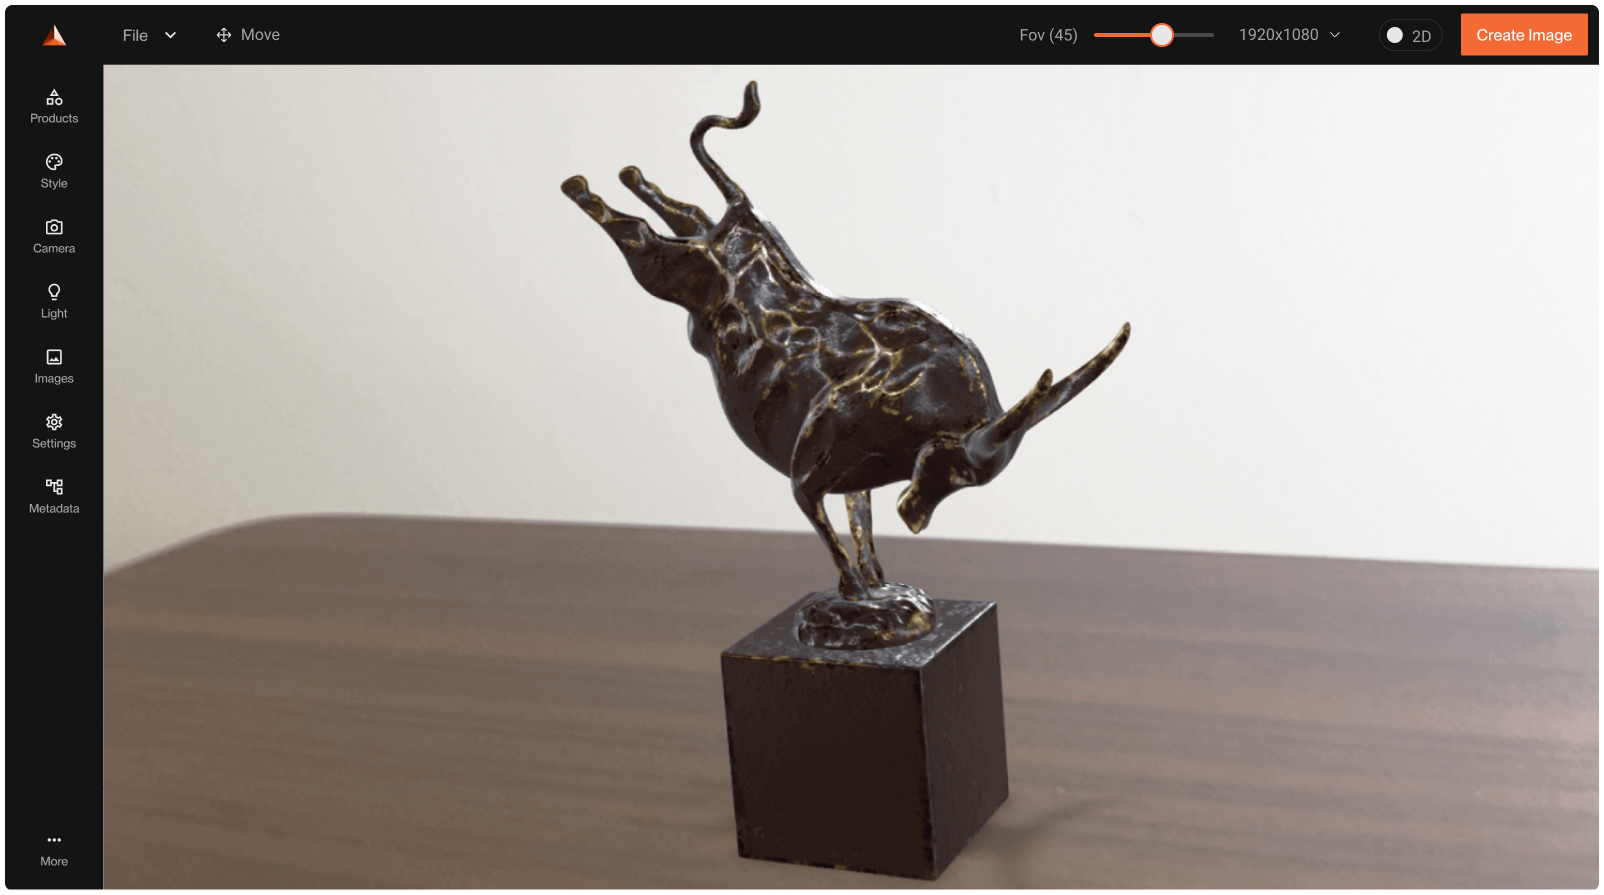 Realistic bull accessory displayed on tabletop using imagine.io augmented reality generator